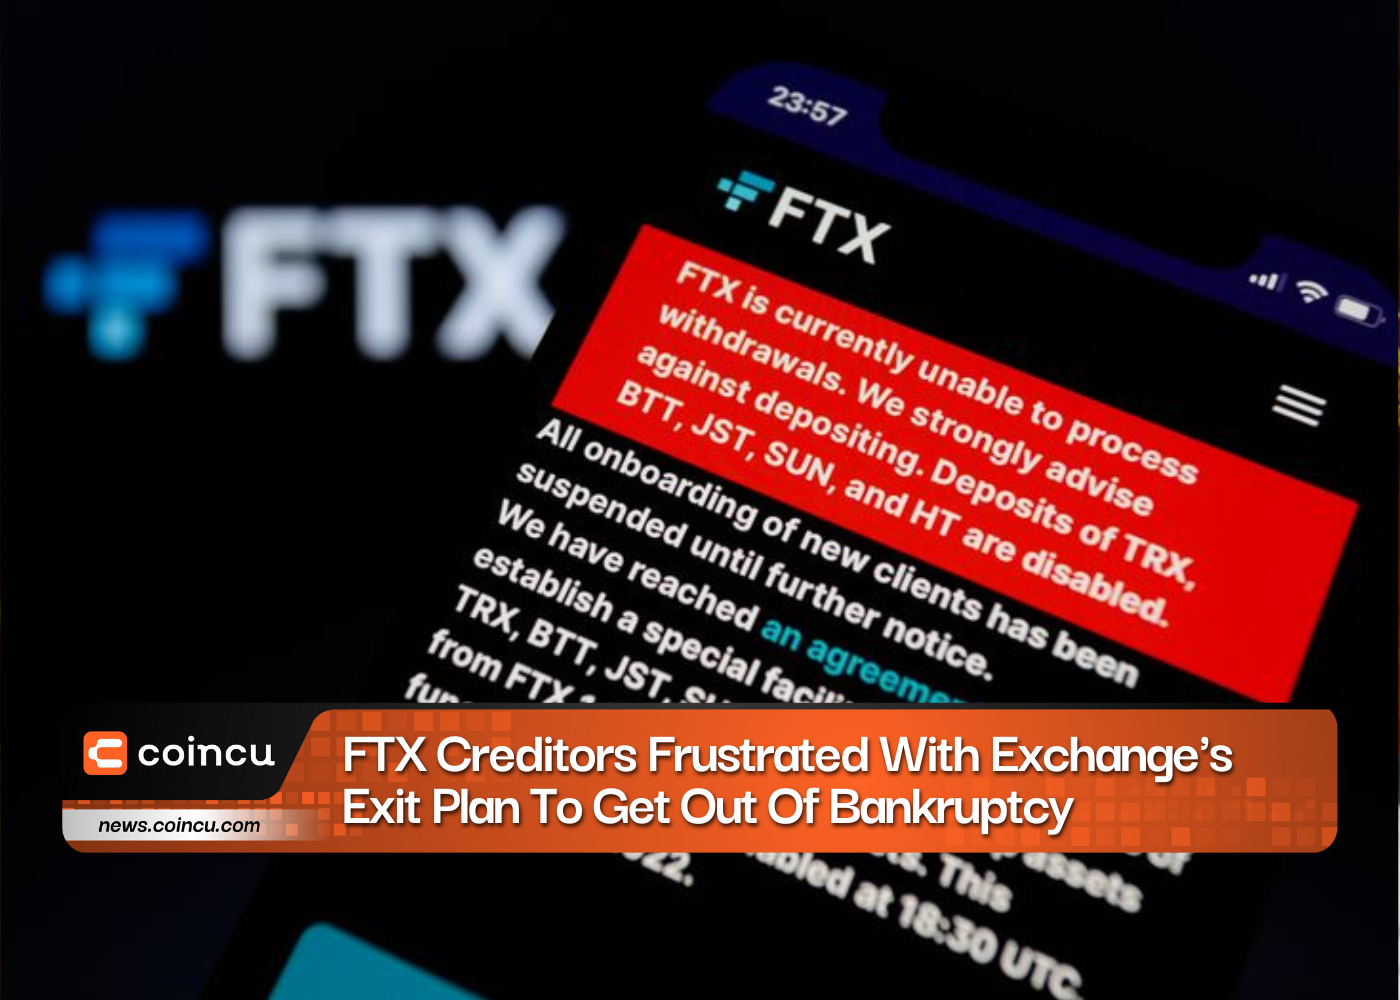 FTX Creditors Frustrated With Exchange's Exit Plan To Get Out Of Bankruptcy